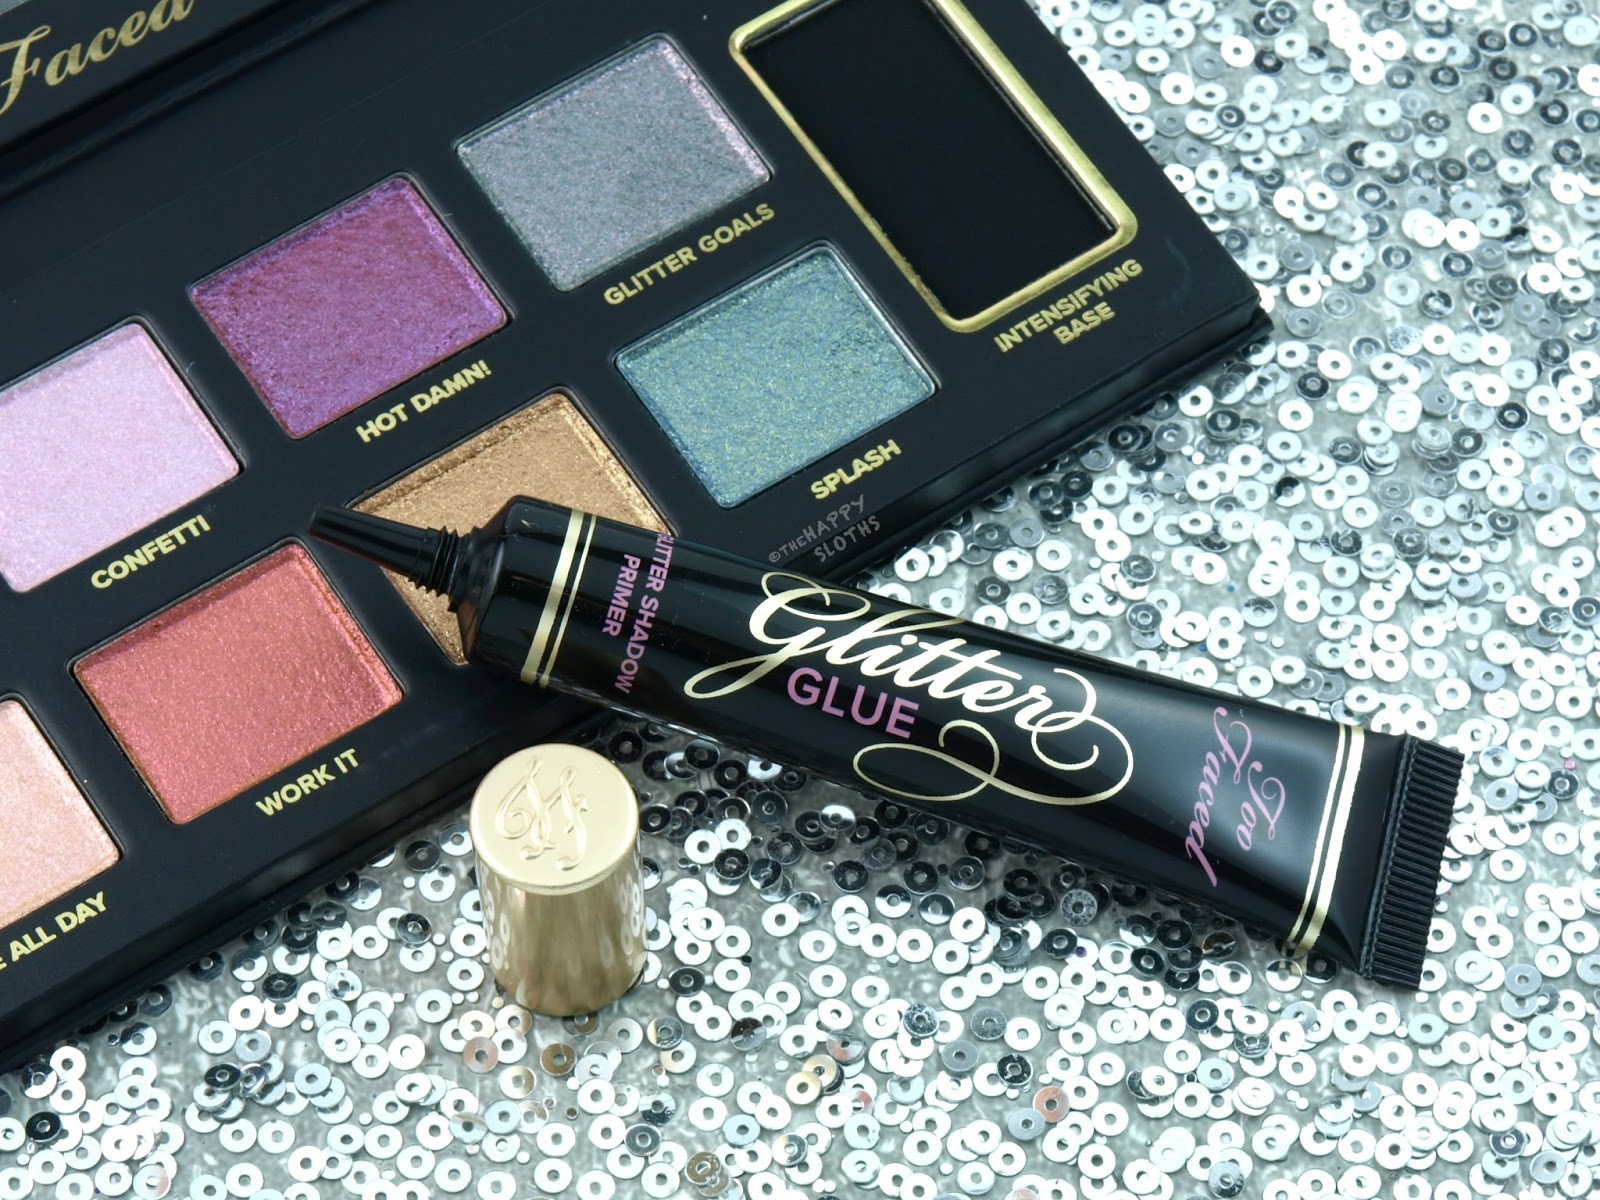 Too Faced Shadow Insurance Glitter Glue Glitter Shadow Primer: Review and Swatches